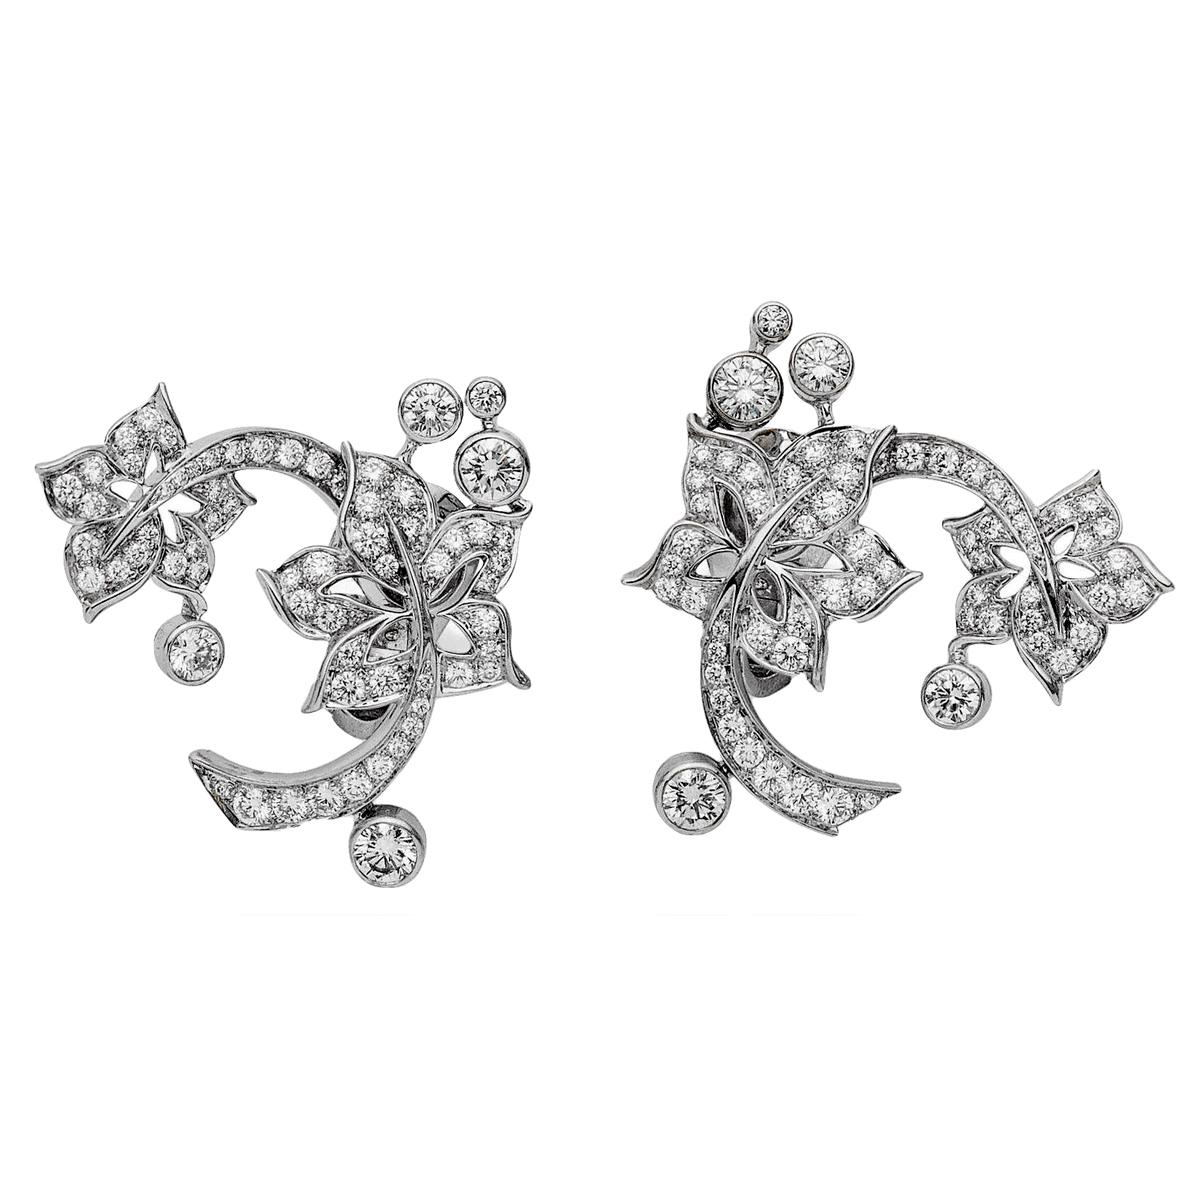 A incredible set of Van Cleef & Arpels diamond white gold earrings, the earrings showcase a floral motif crafted in 18k white gold and are set with 2.35ct of the finest round brilliant cut diamonds.